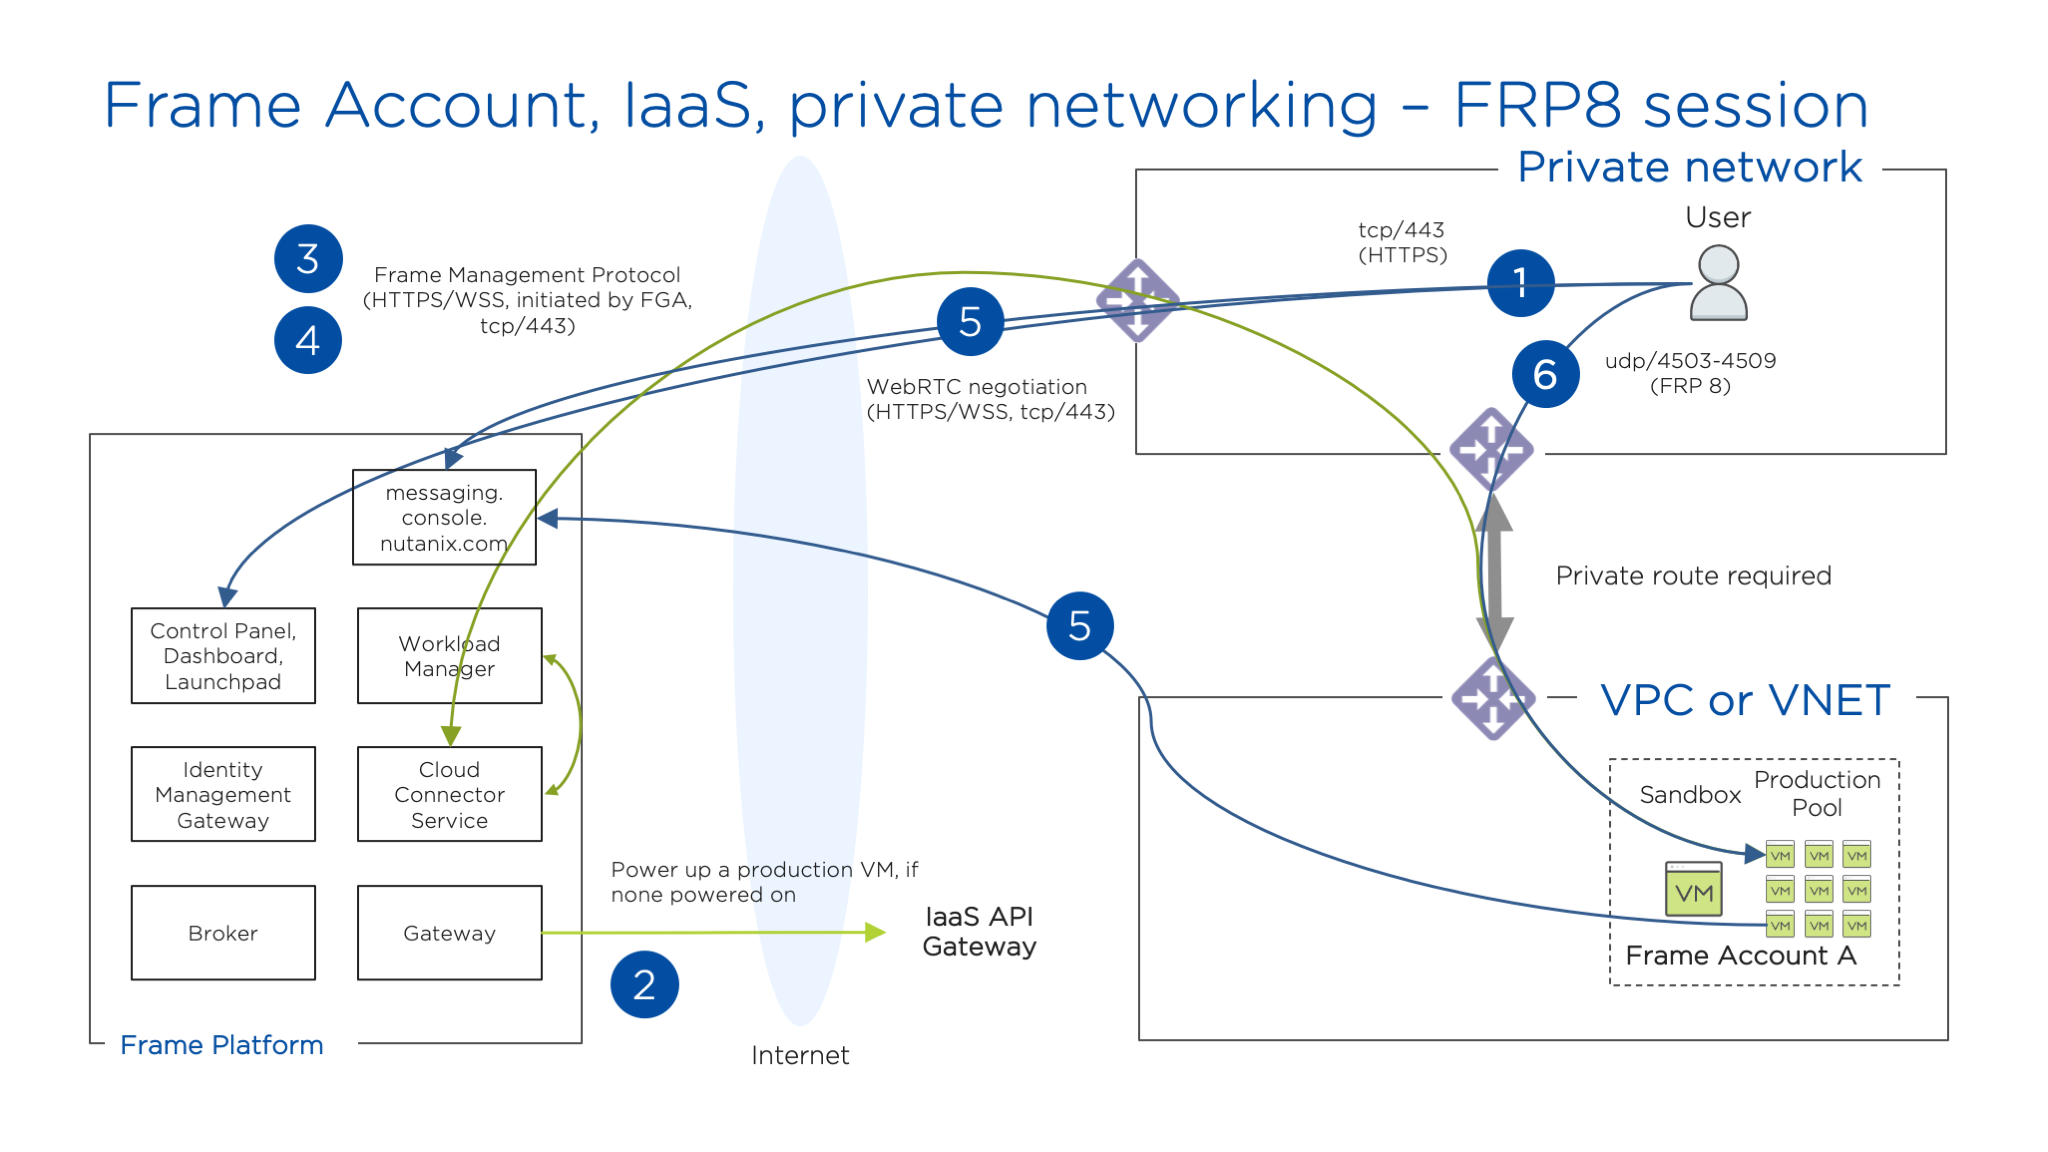 Public IaaS - Private Networking (FRP8)